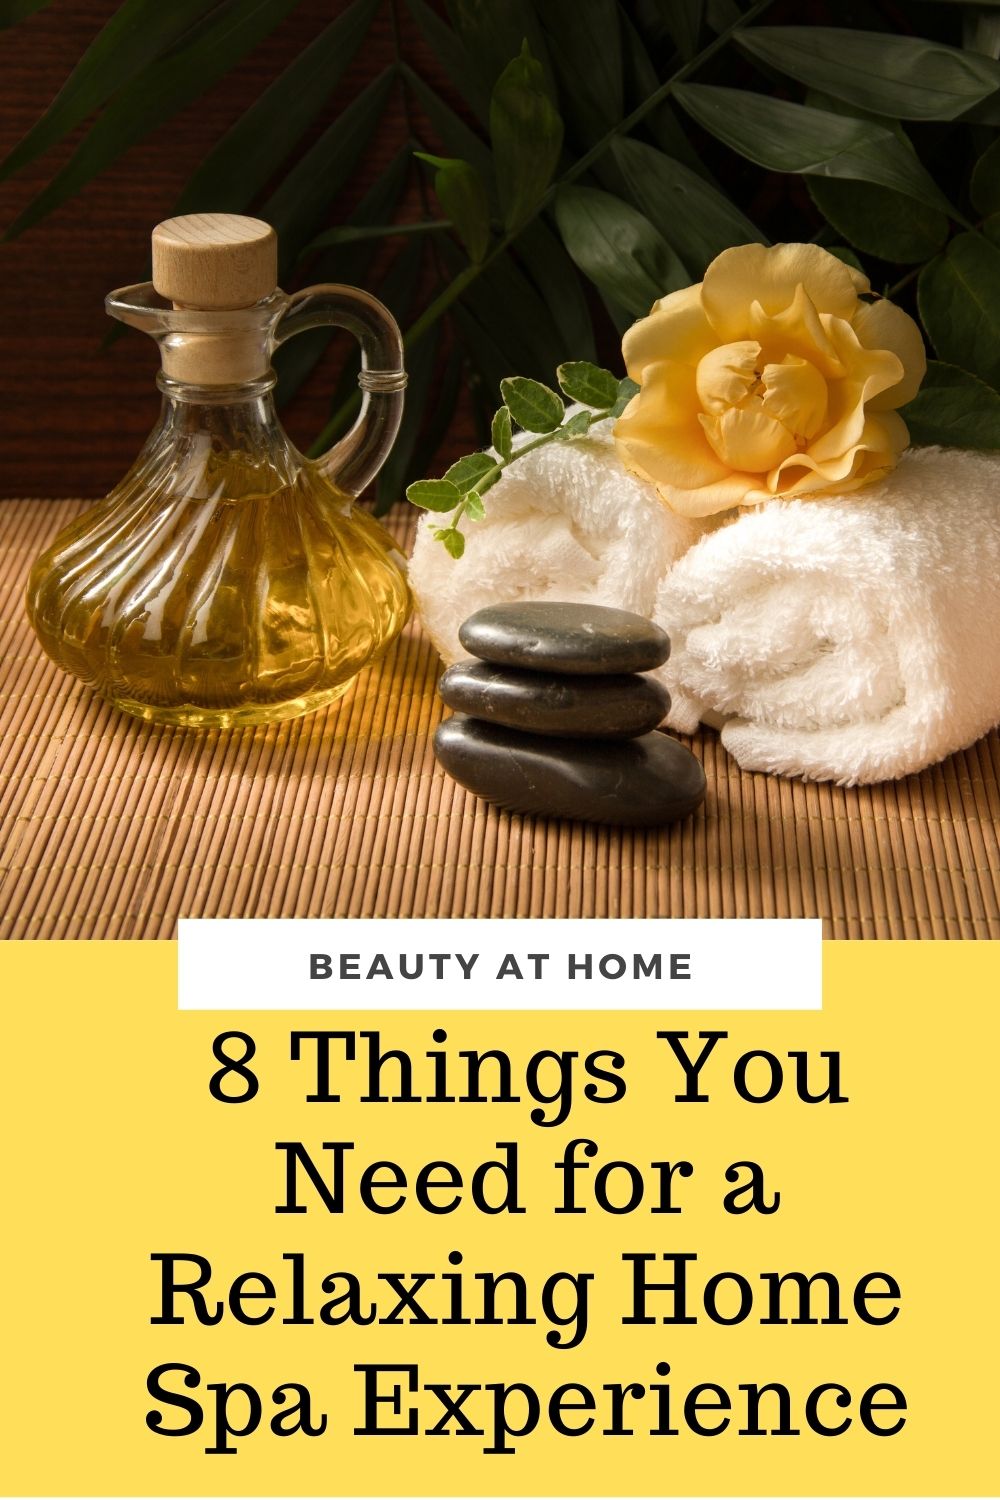 8 Things You Need for a Relaxing Home Spa Experience